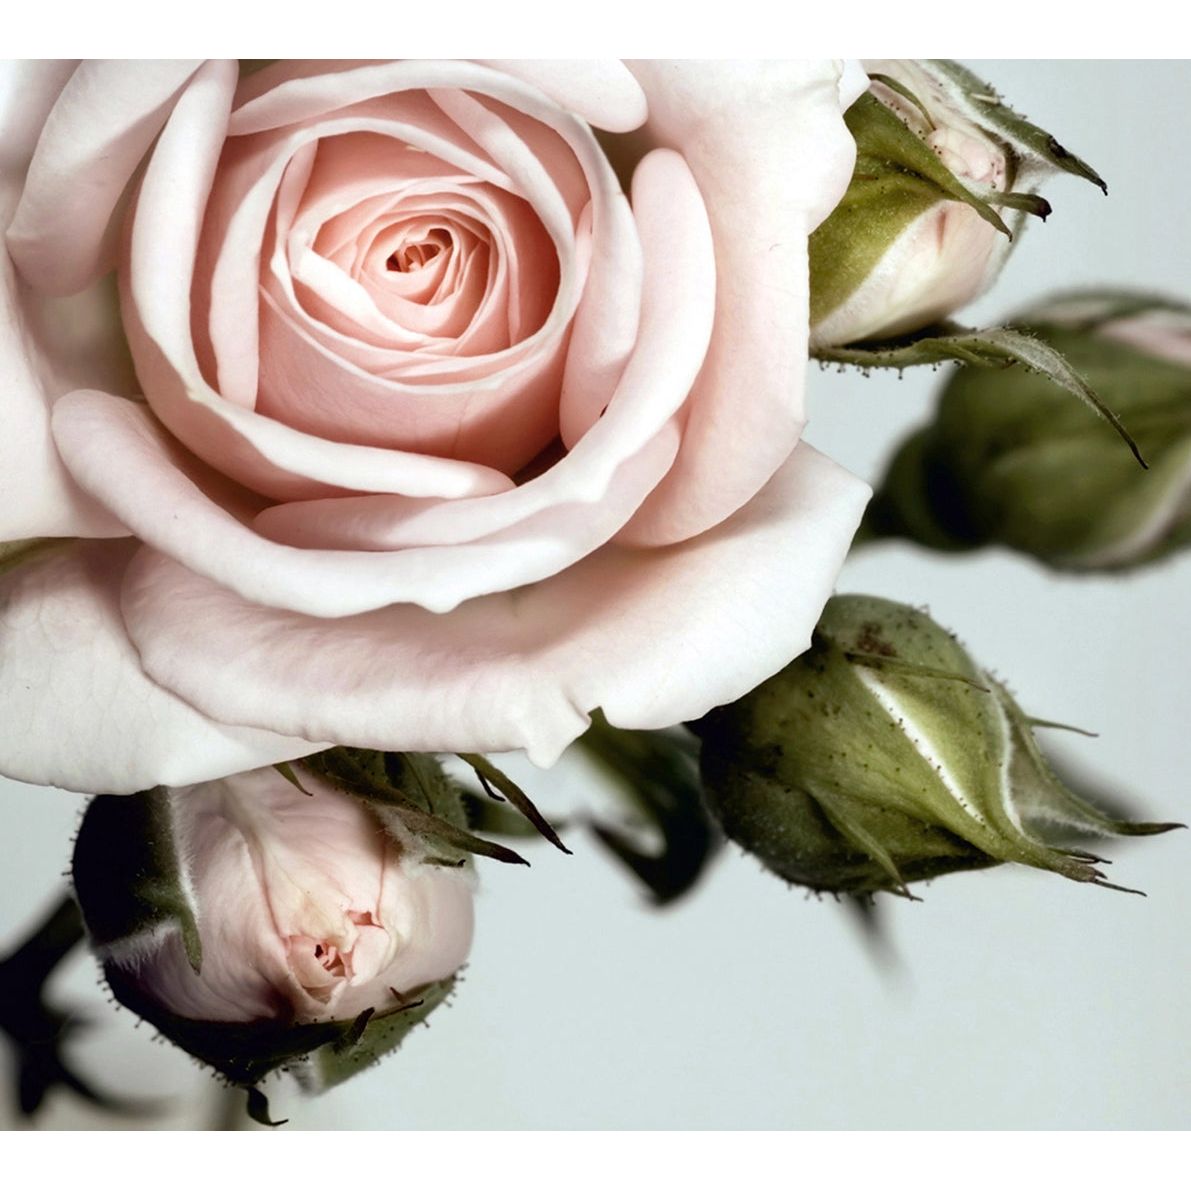 Rose's Gentle Blush: A Floral Wall Mural with Soft Pinkish Leafs